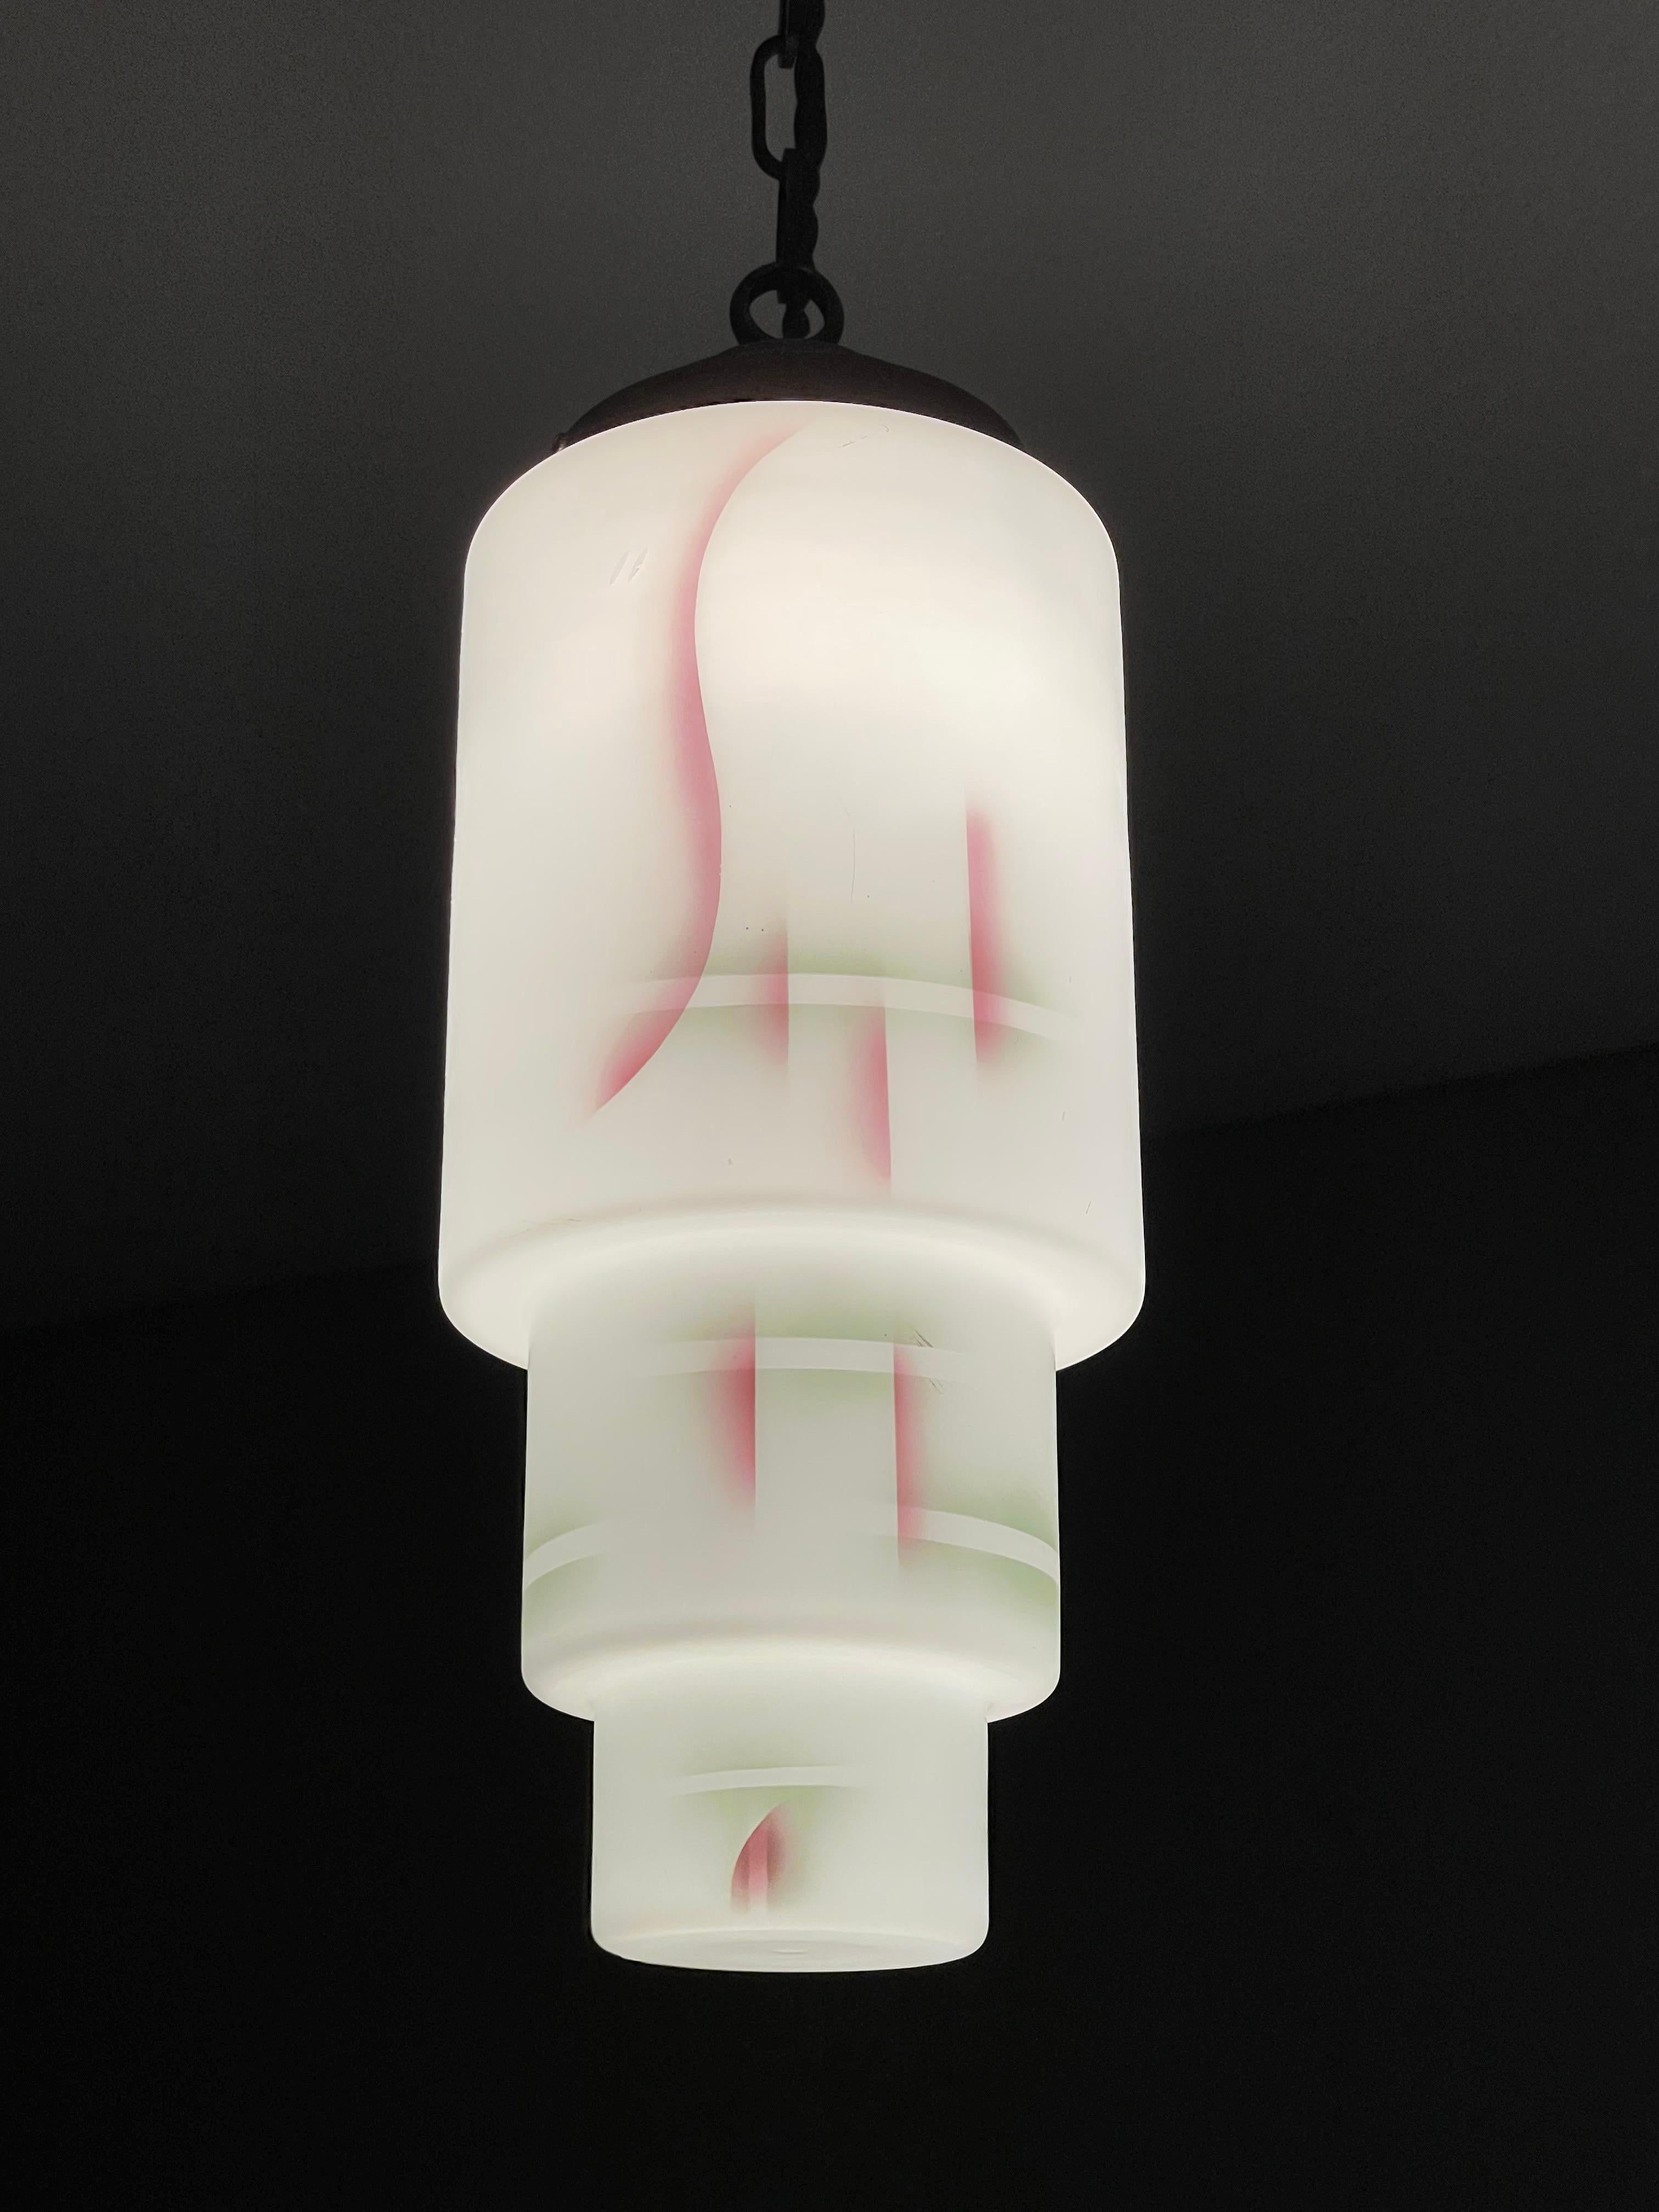 Wonderful design and very stylish Art Deco light fixture.

There is a perfect pendant light for every room. That is what I thought when I first saw this Art Deco fixture, because this striking light will look great in many rooms and spaces. We know